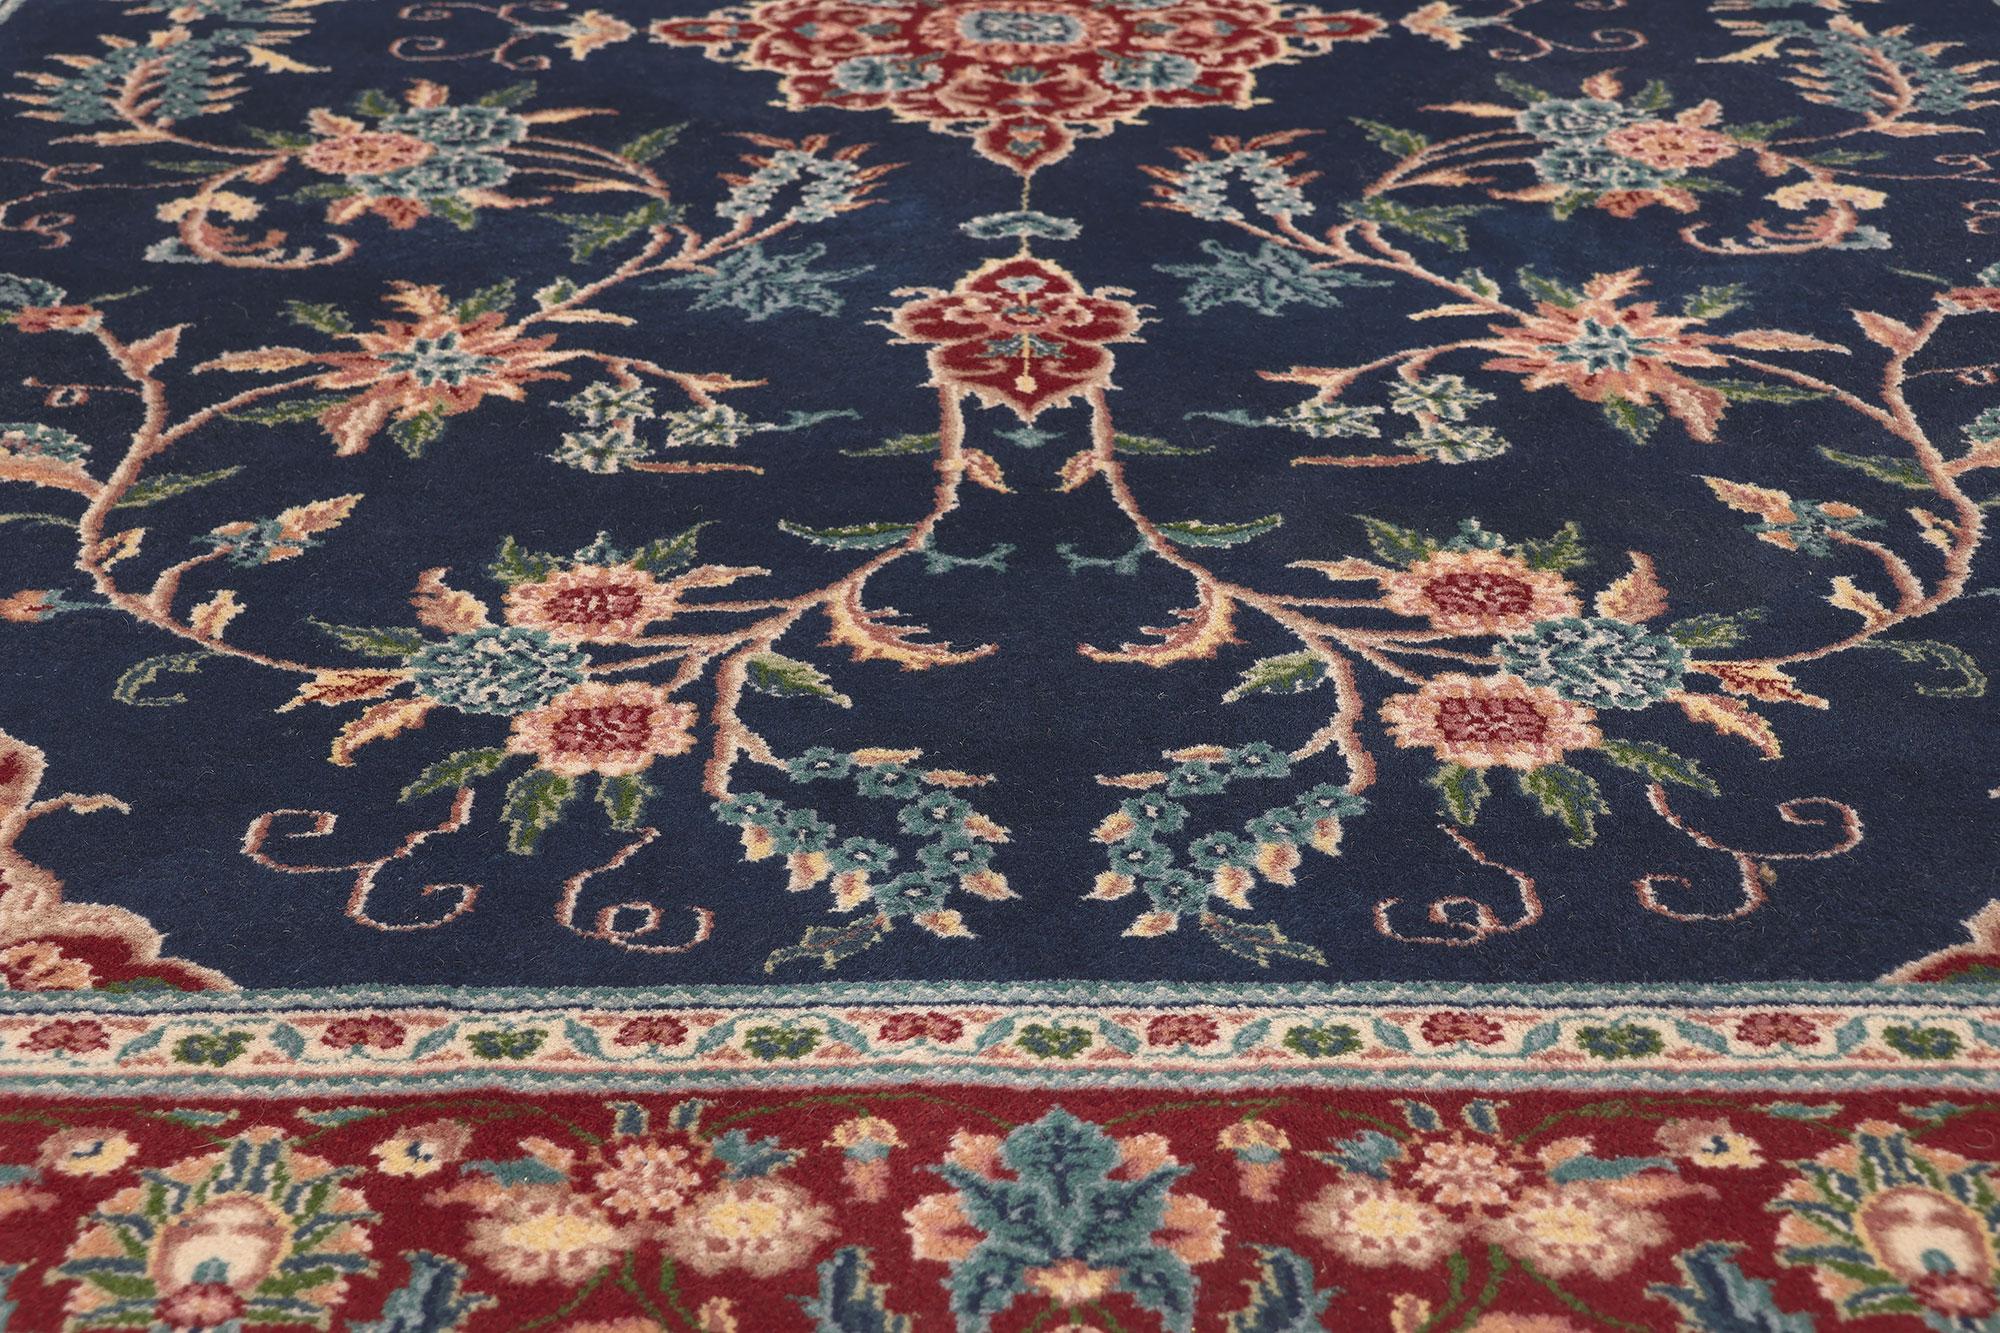 Vintage Indian Rug, Traditional Sensibility Meets Patriotic Flair In Good Condition For Sale In Dallas, TX